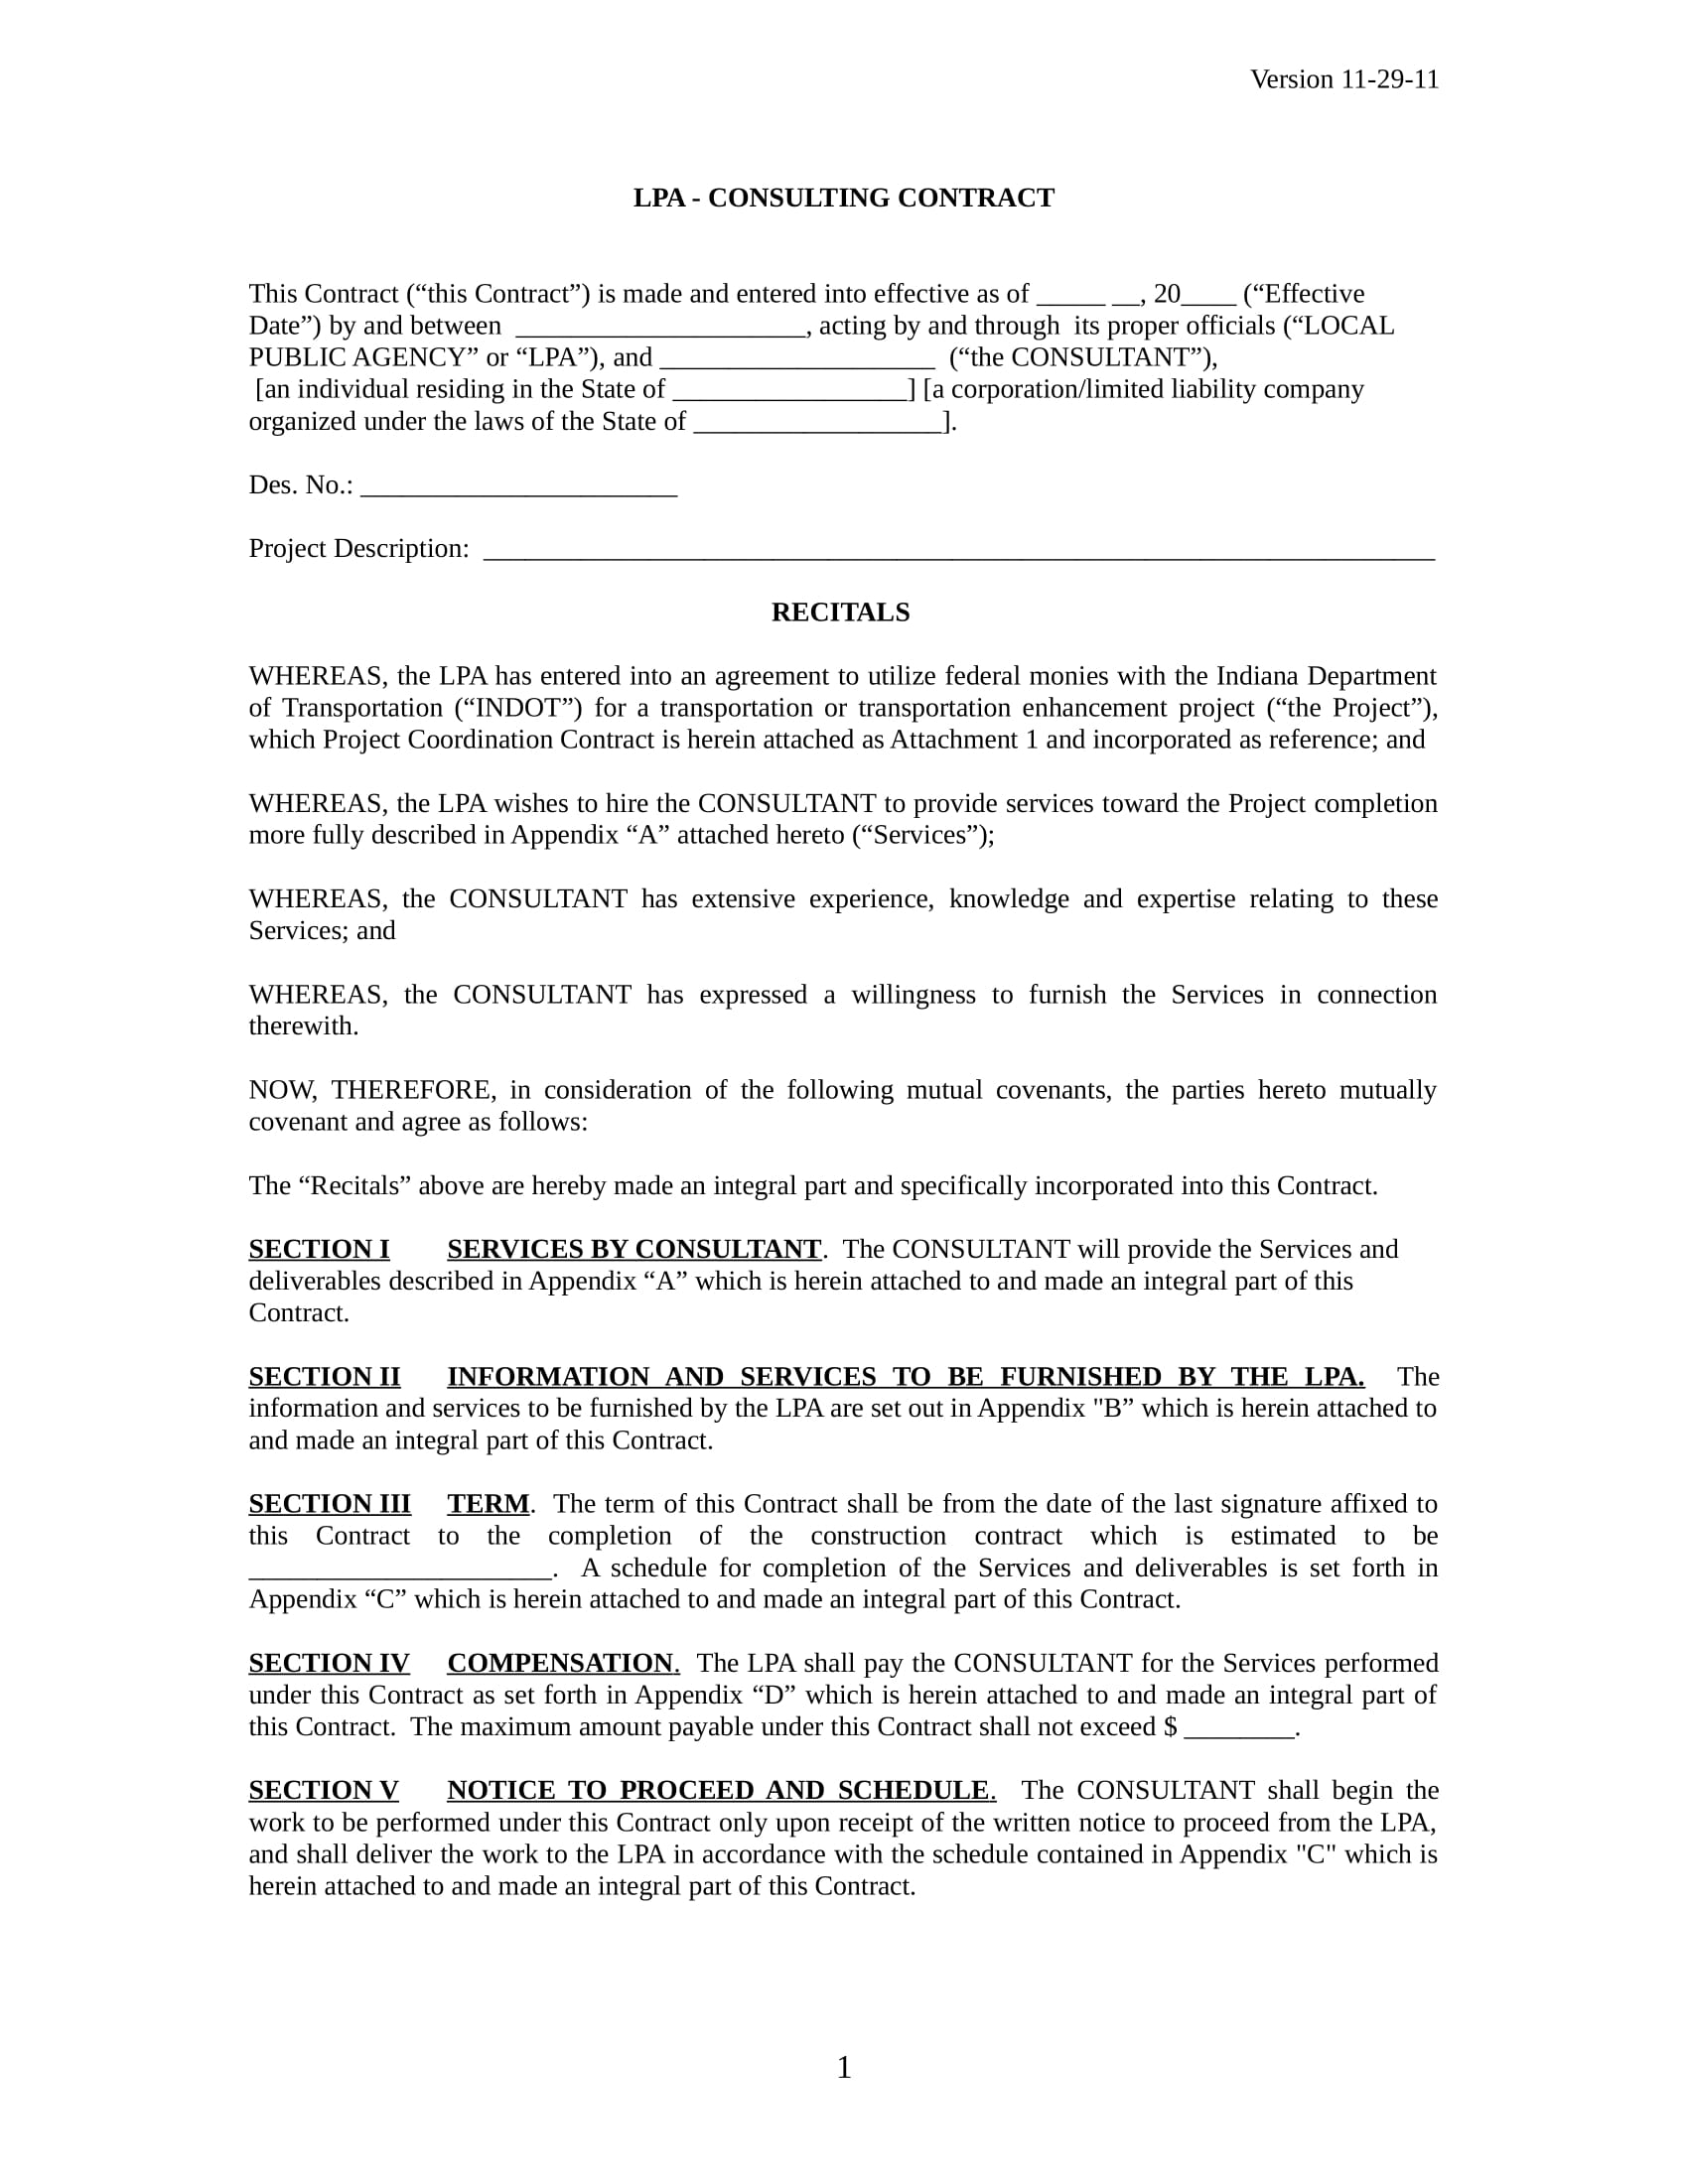 local public agency consulting contract form 01